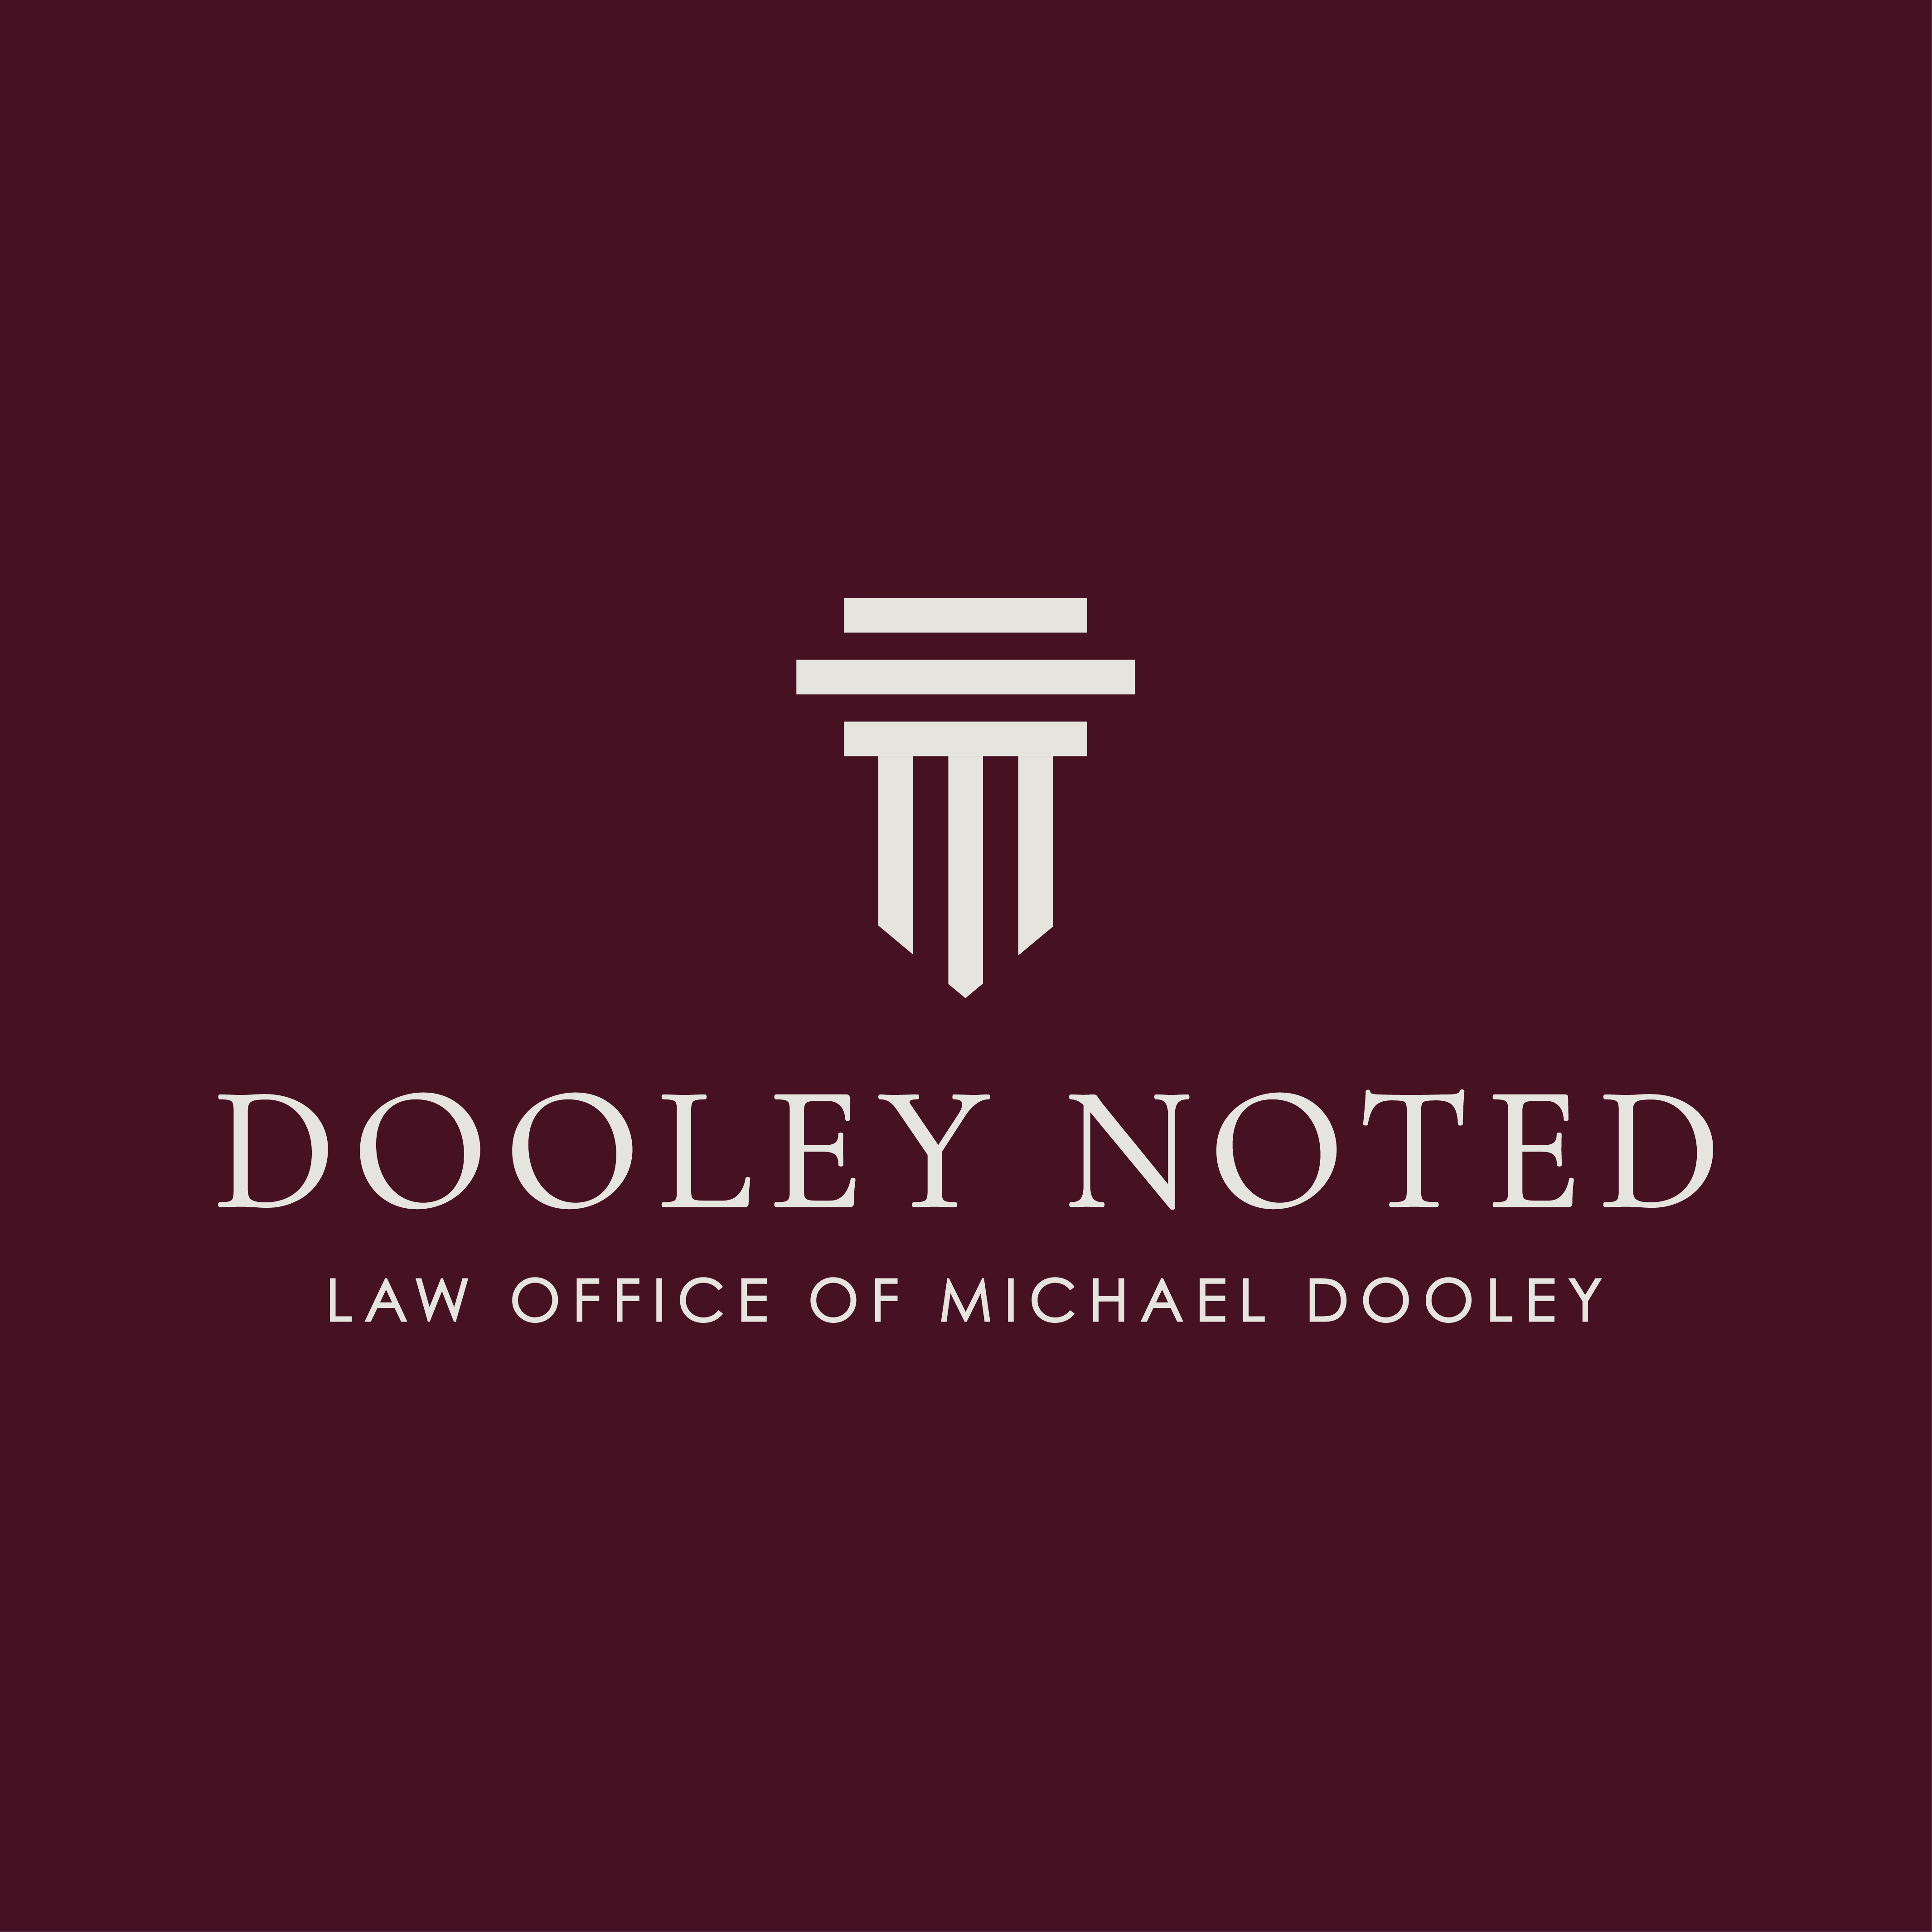 Dooley Noted, Business Lawyer, Estate planning, Restaurant Lawyer, Insurance Dispute attorney, Alternative Dispute Resolutions